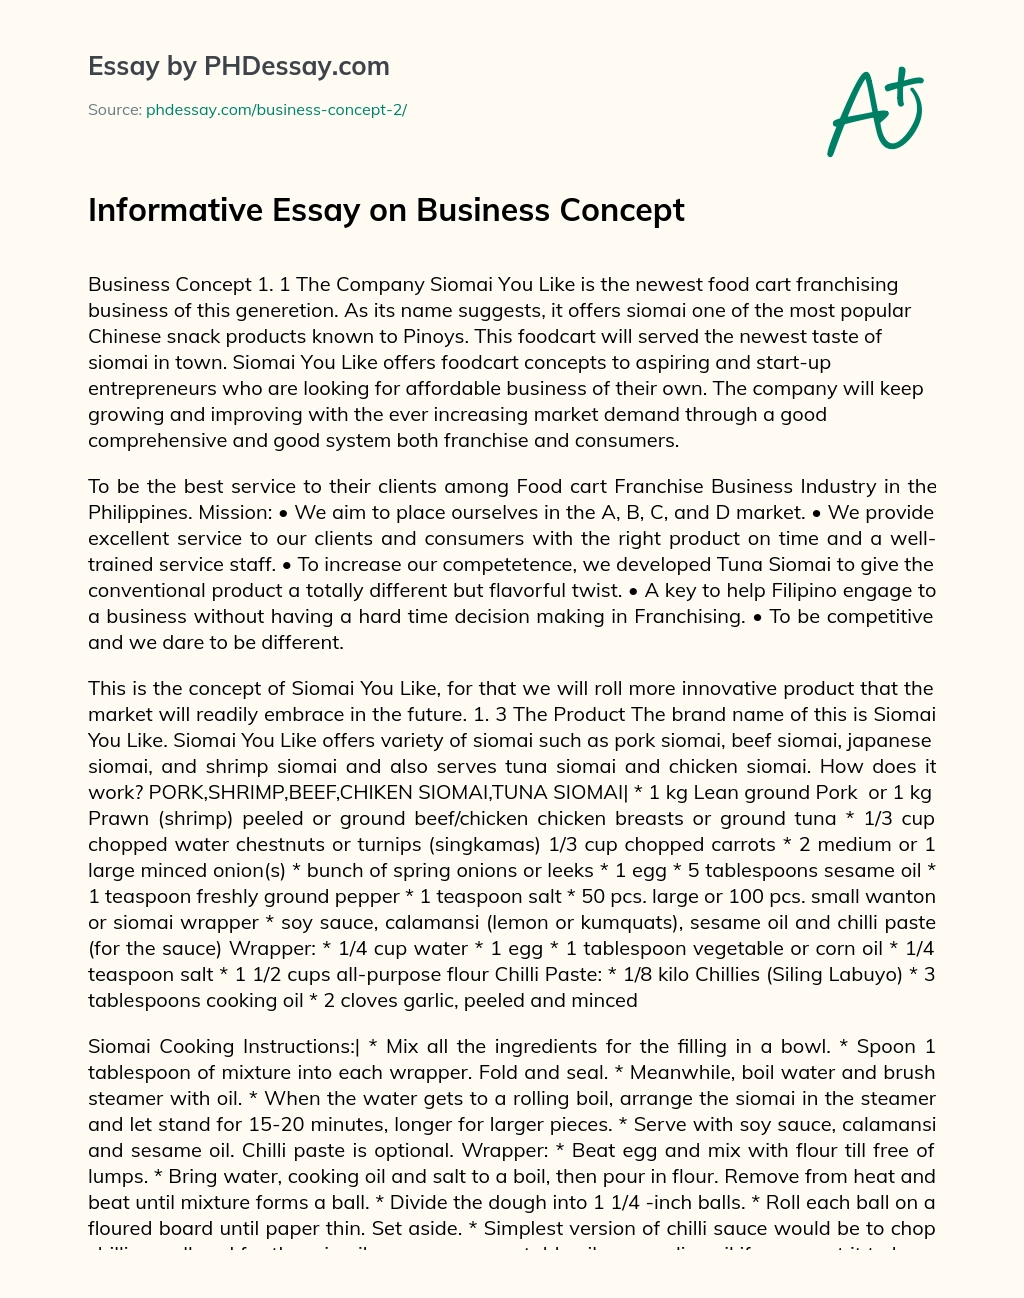 Informative Essay on Business Concept essay